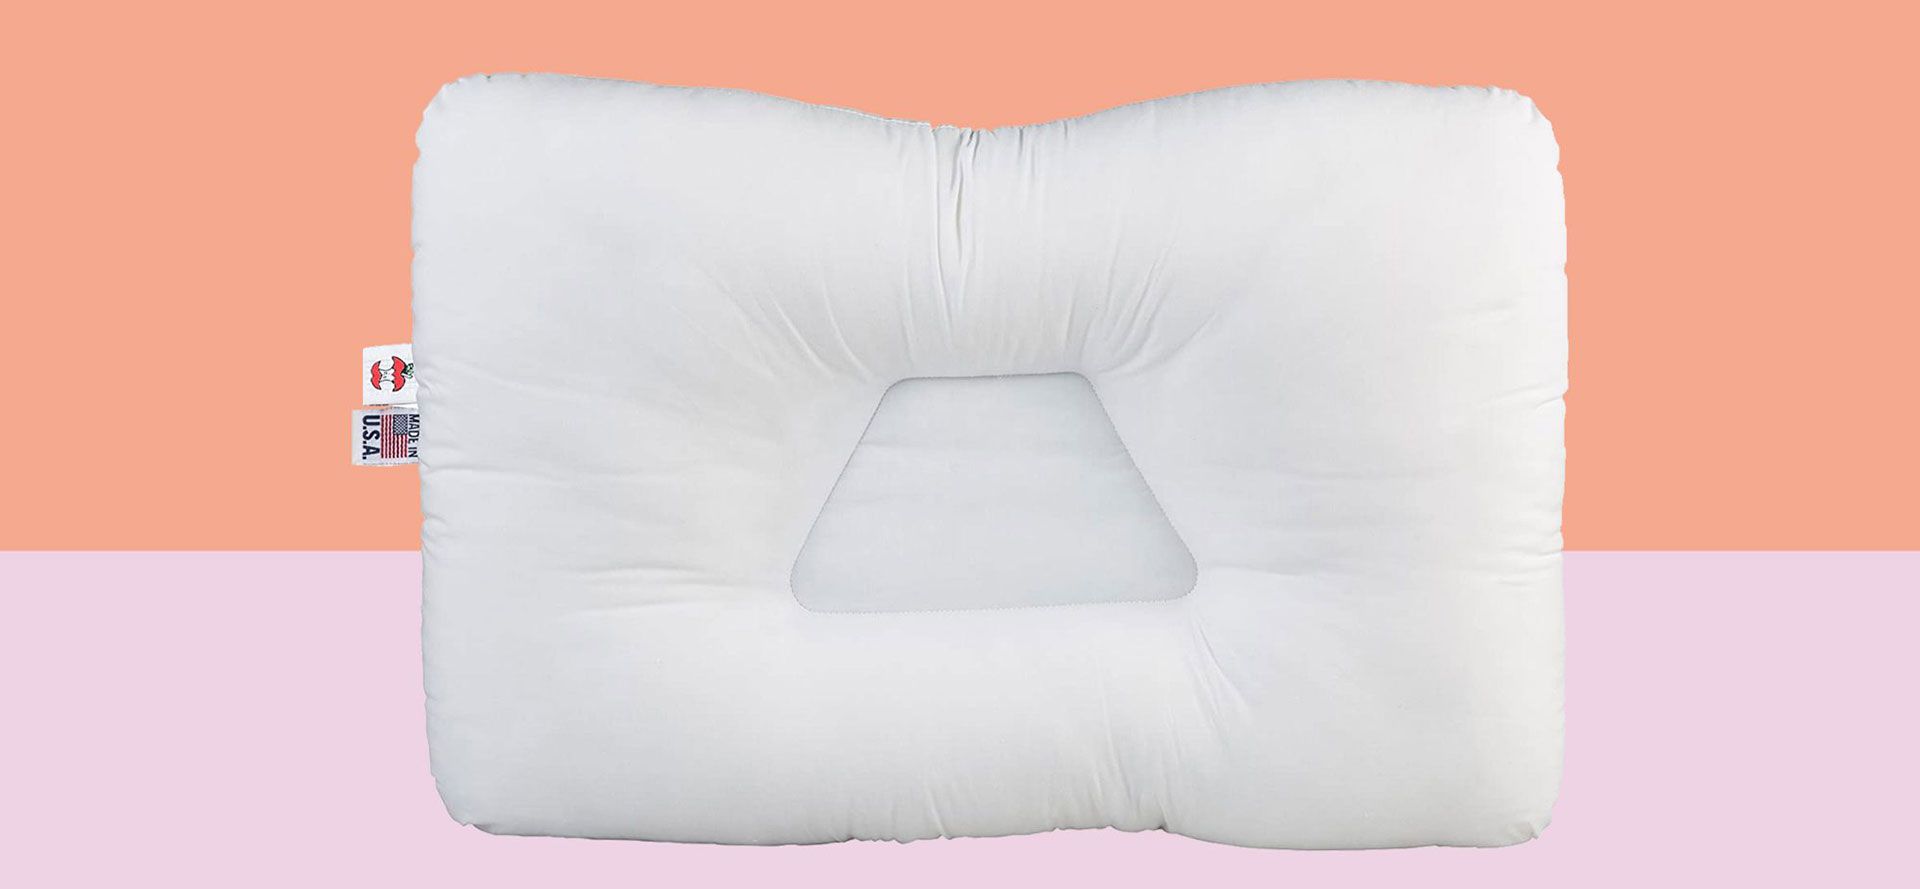 Soft Pillows For Neck Pain.